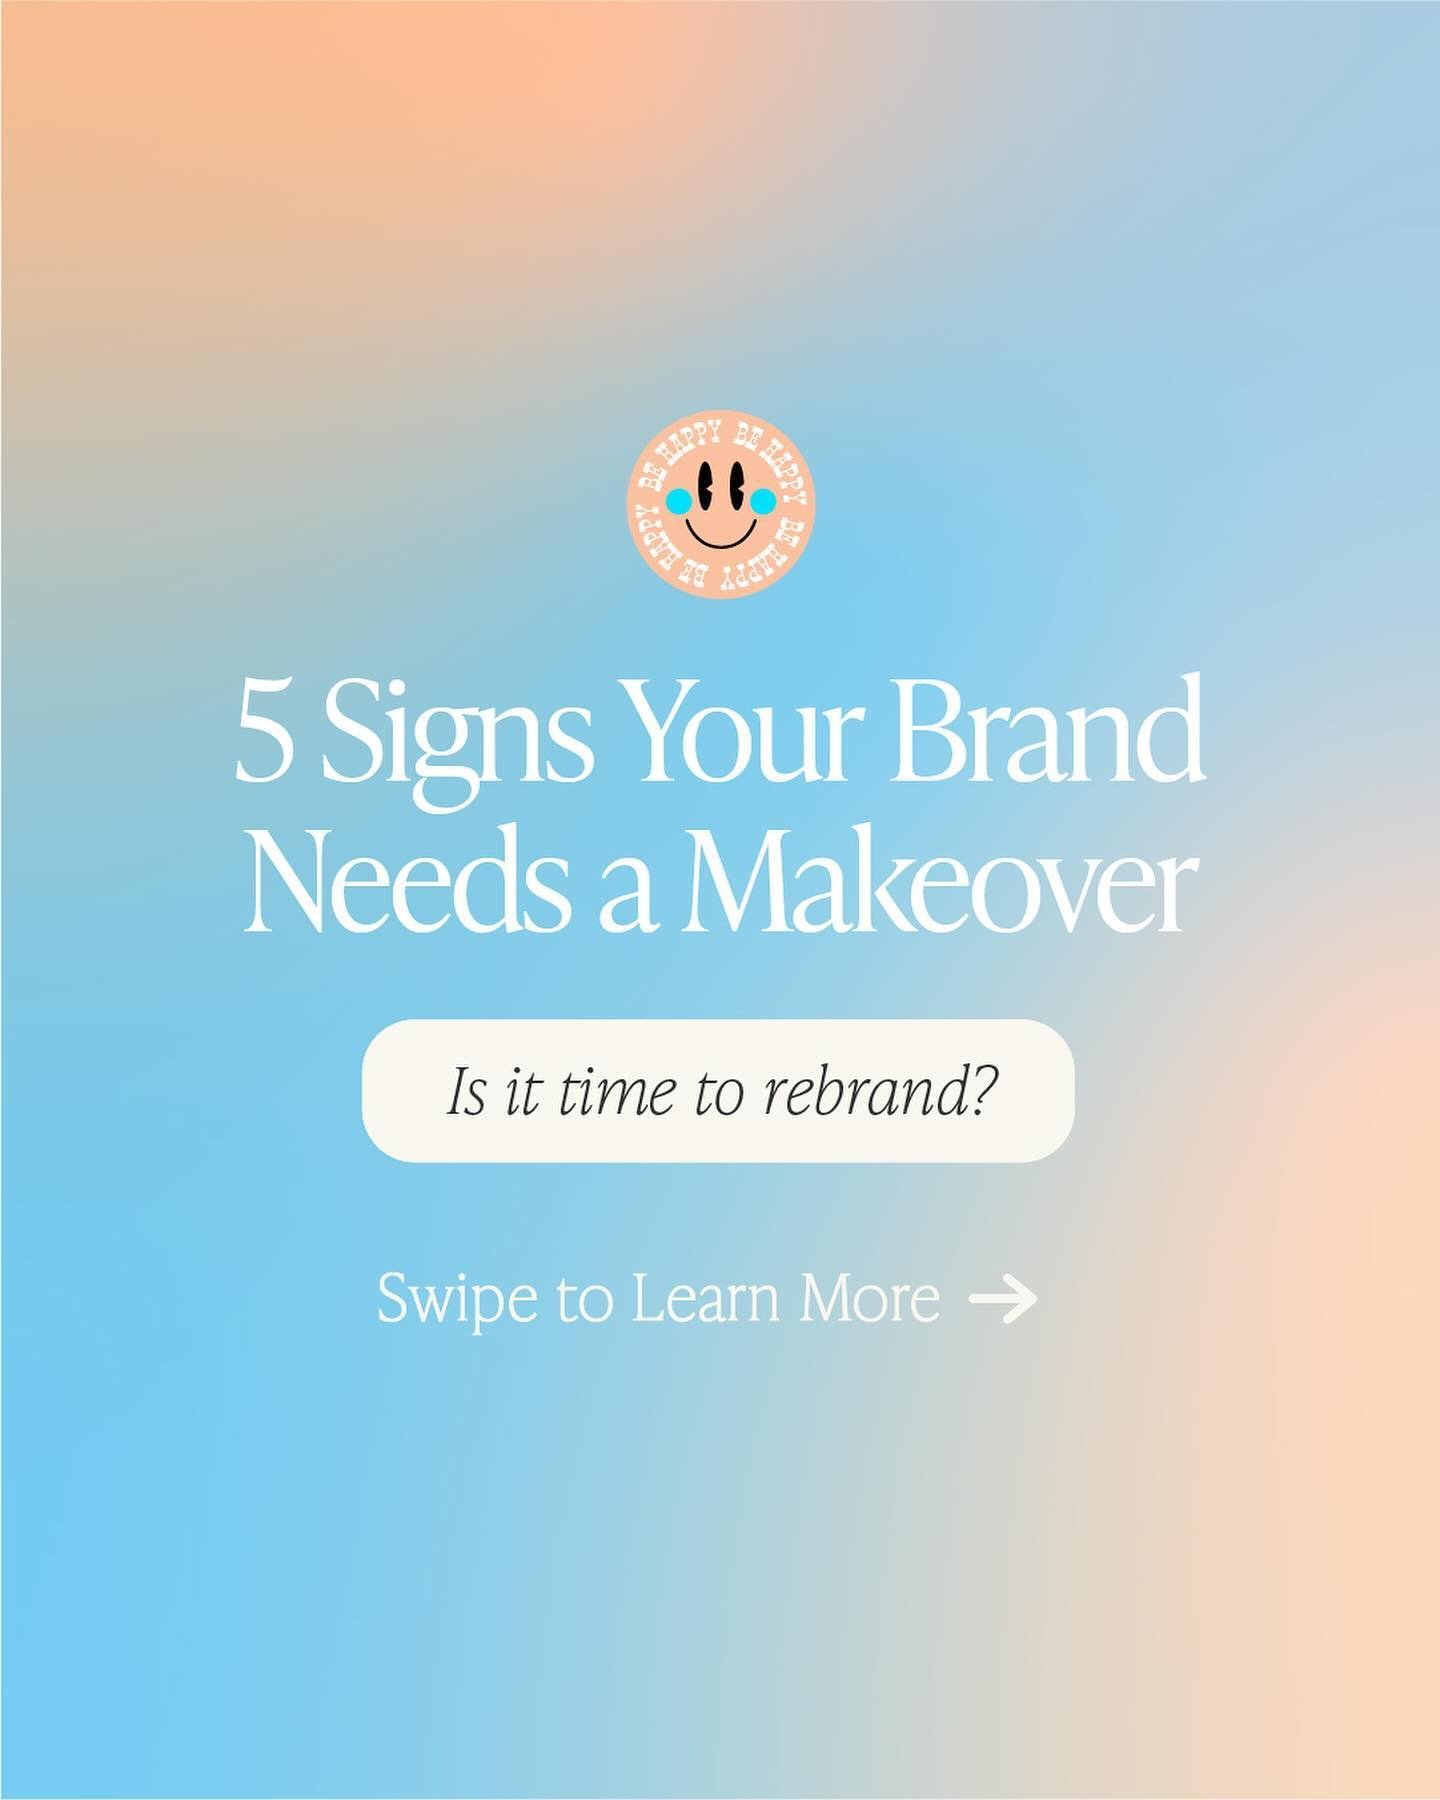 Let&rsquo;s talk about rebranding without hitting the panic button &ndash; trust me, after helping multiple clients successfully relaunch, I&rsquo;ve learned that knowing these signs before it&rsquo;s an emergency can be a game-changer for your busin